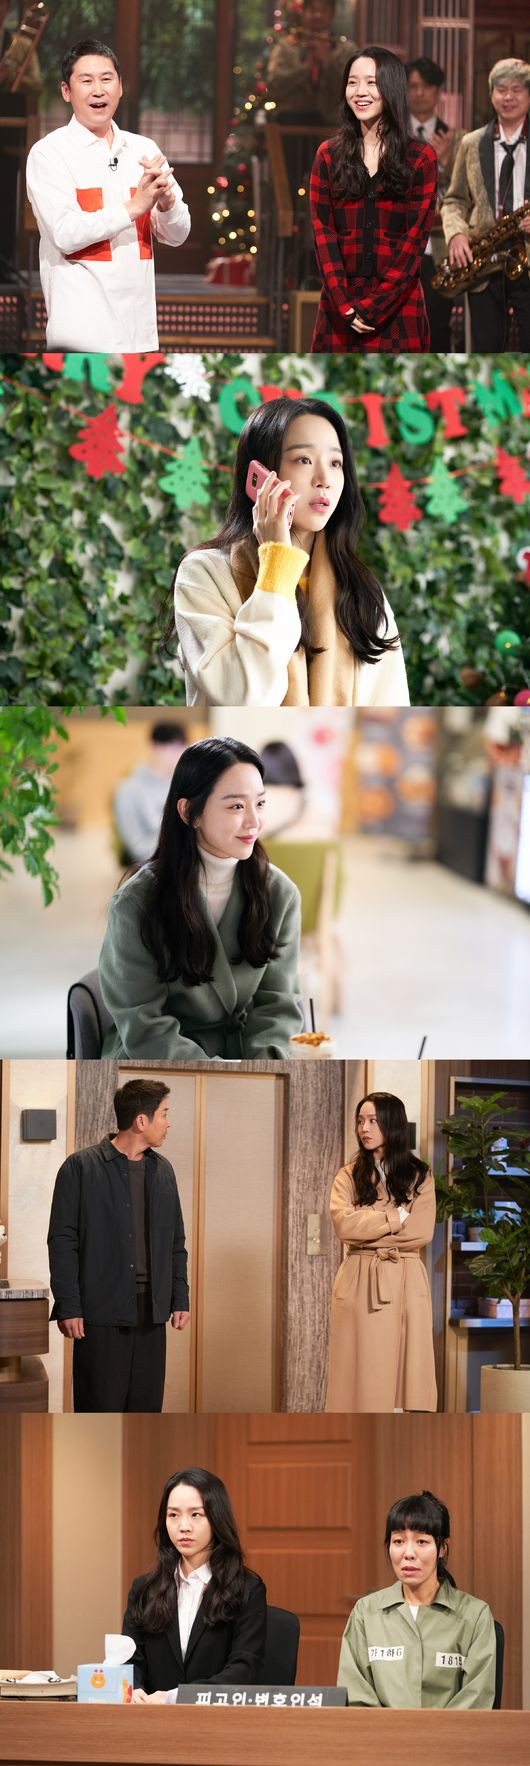 Coupang Plays original comedy show SNL Korea (production AStory) Season 2, which delivers high-quality laughter with unrelenting satire, parody and fresh humor, is adding to expectations by foreshadowing its first broadcast with host Shin Hye-sun on December 25.Actor Shin Hye-sun, who has been active in the drama Golden My Life, Iron Queen, Uncle, Graveling, and continues to play a big role in the screen and the CRT.Actor Shin Hye-sun, who has been active with solid acting ability and overwhelming presence, is going to attract viewers with the charm of the past class that has never been seen before.In the section Seventeen but Thirty, which parodied Thirty but Seventeen, Shin Hye-sun plays a camouflage police officer who infiltrated high school to investigate the actual situation of school violence, and goes on to conquer the MZ generation culture from various buzzwords to Heima Challenge.In the same section of the parody of the movie Innocent, she will take on the lawyer Character, who reveals the evidence that she is a mother solo in court to prove the innocence of Crew Cha Chung Hwa, who was accused of raiding her boyfriend on Christmas.In the Algorithm Girlfriend corner, which co-works with Kwon Hyuk-soo, she plays a role as a girlfriend who knows everything from 10 to 10, and Shin Hye-sun plays a role of fiercely nervous battle with Shin Dong-yup, It predicts a steady and unstoppable performance, adding to expectations.The SNL Korea season 2, which will catch Saturday night at once with the unstoppable performance of super-selected host Shin Hye-sun, will be released on Coupang Play every Saturday night at 10 pm starting from the first broadcast on December 25th.Coupang Play is Coupangs OTT service for rocket customers, and is available free of charge to any customer who joins RocketWau membership.cupang play